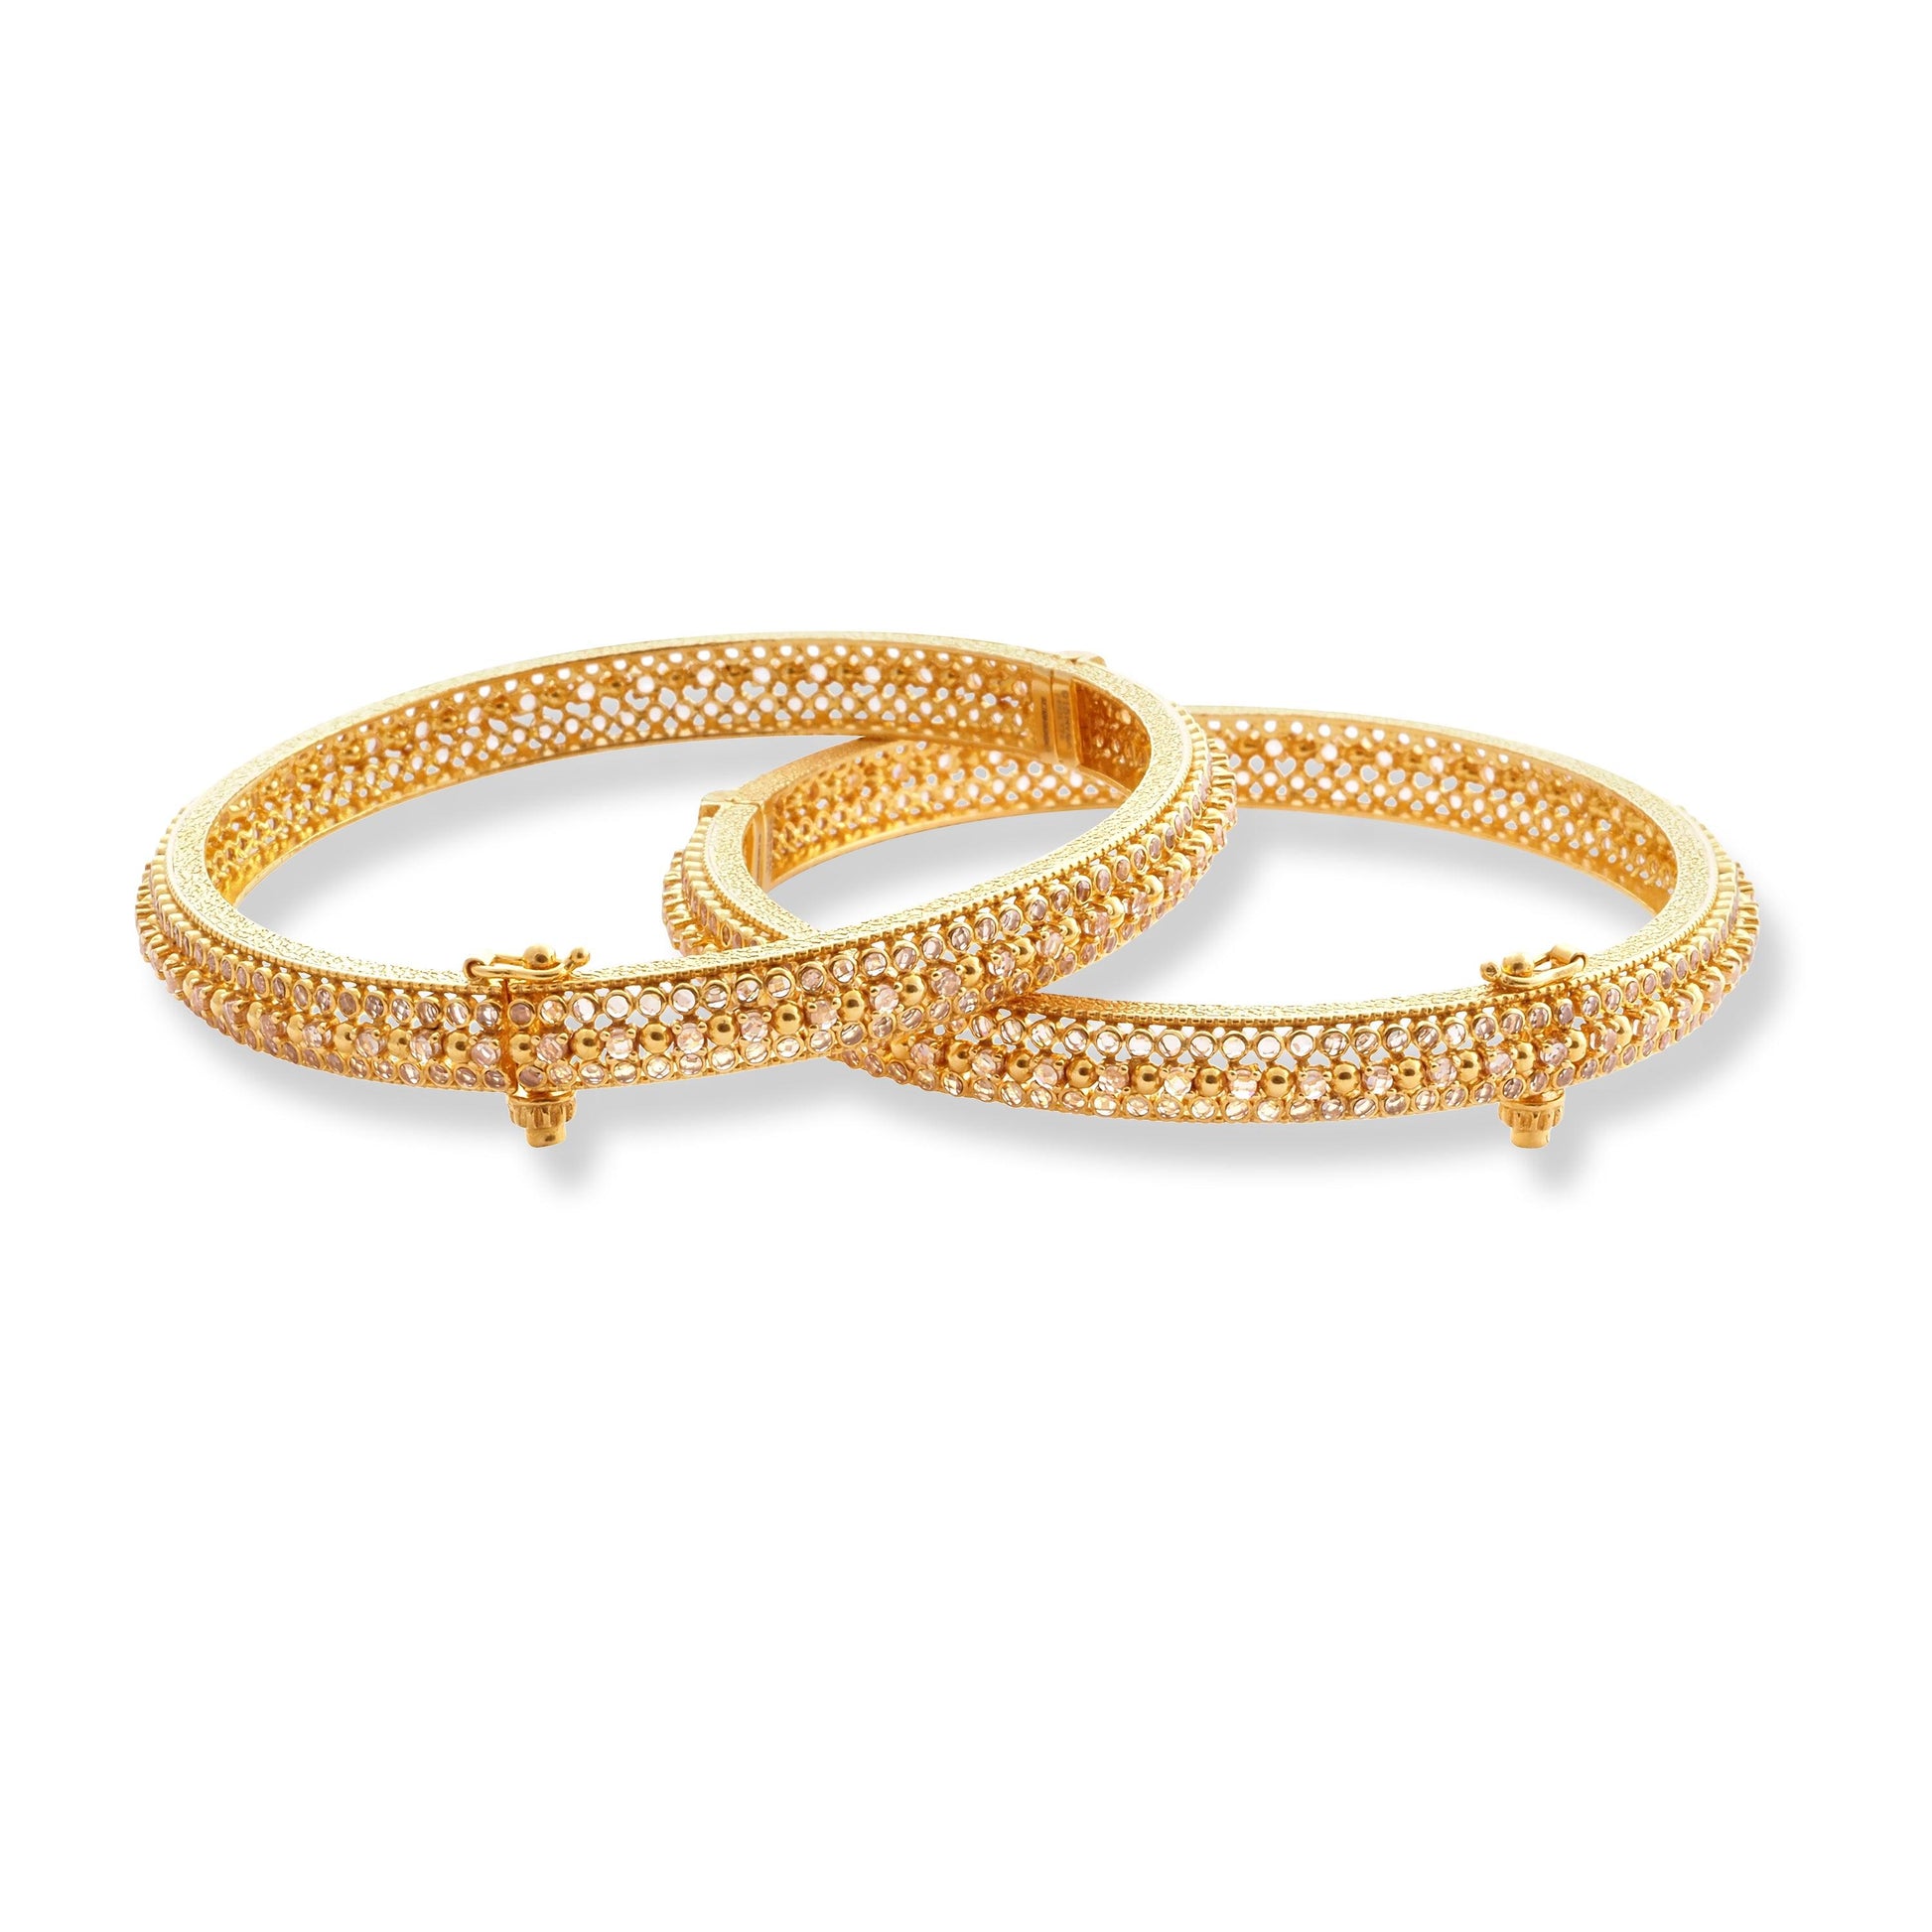 Pair of 22ct Bangles in Hinge & Openable Screw Fitting with Cubic Zirconia B-8589 - Minar Jewellers